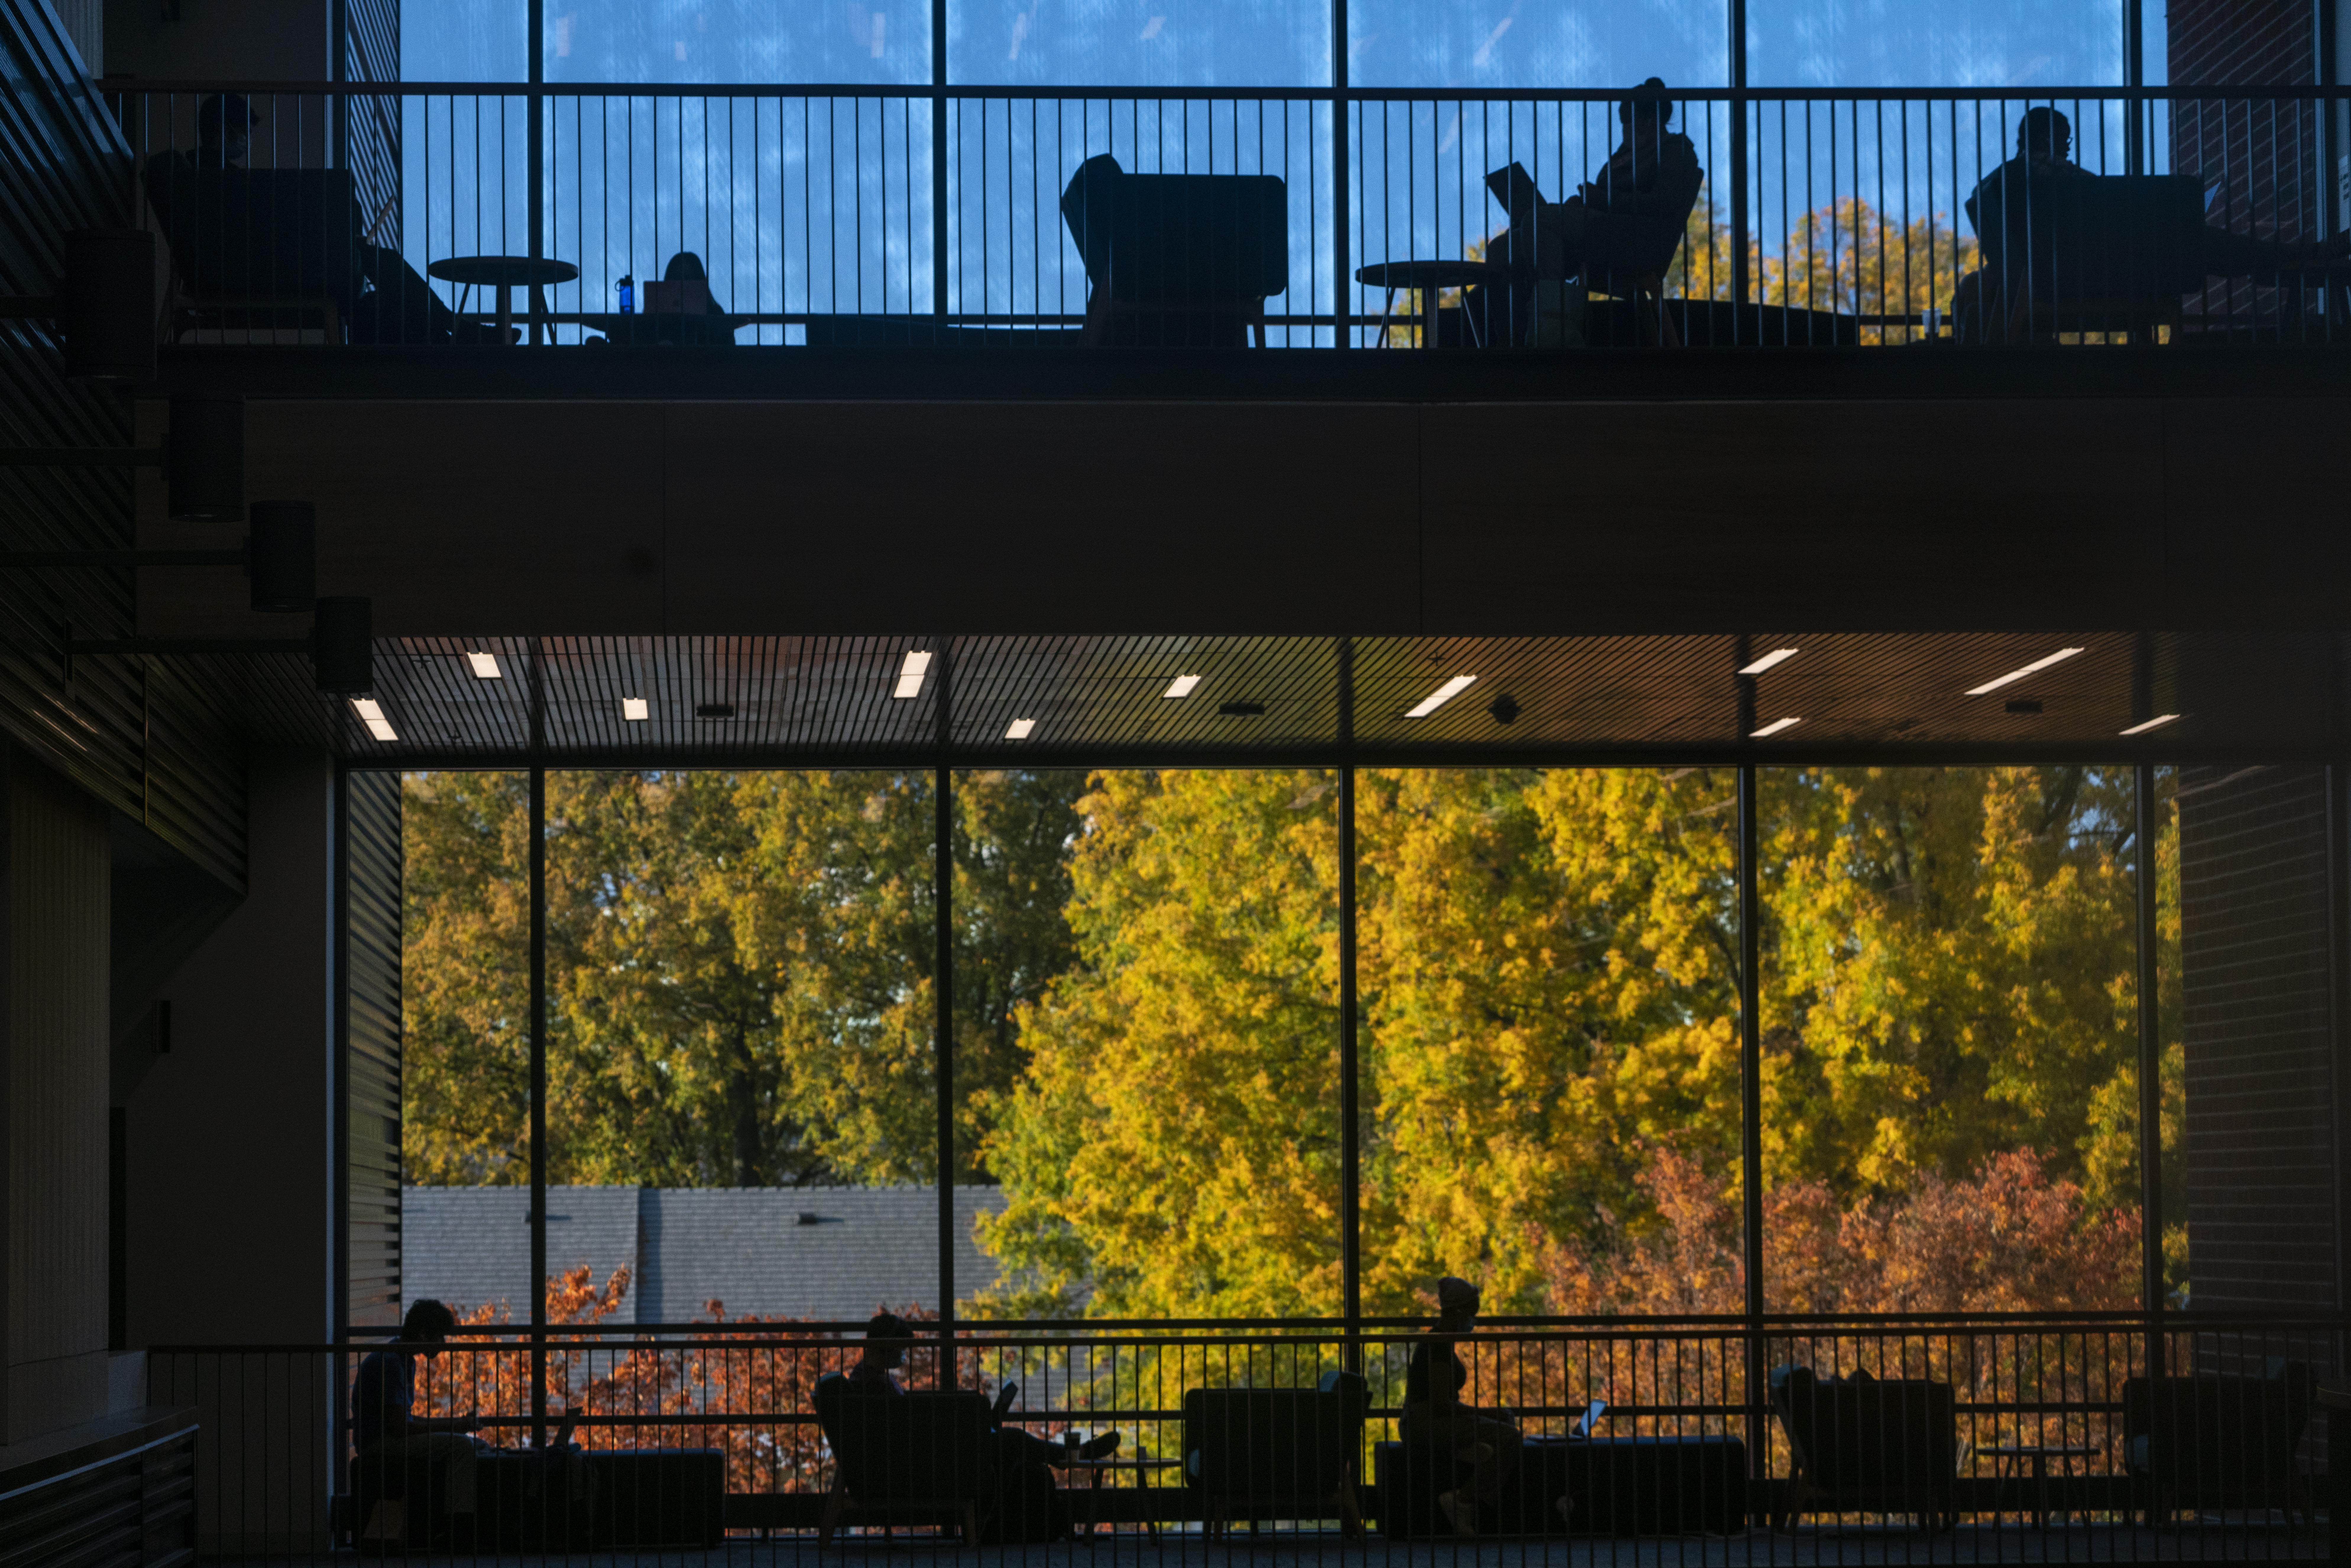 Study spaces in Horizon Hall. People studying are seen as shadowed silhouettes, while the drama in the photo comes from the blue sky and fall foliage that shows through the tall glass windows behind the students. It makes for a sharp and dynamic contrast of color.